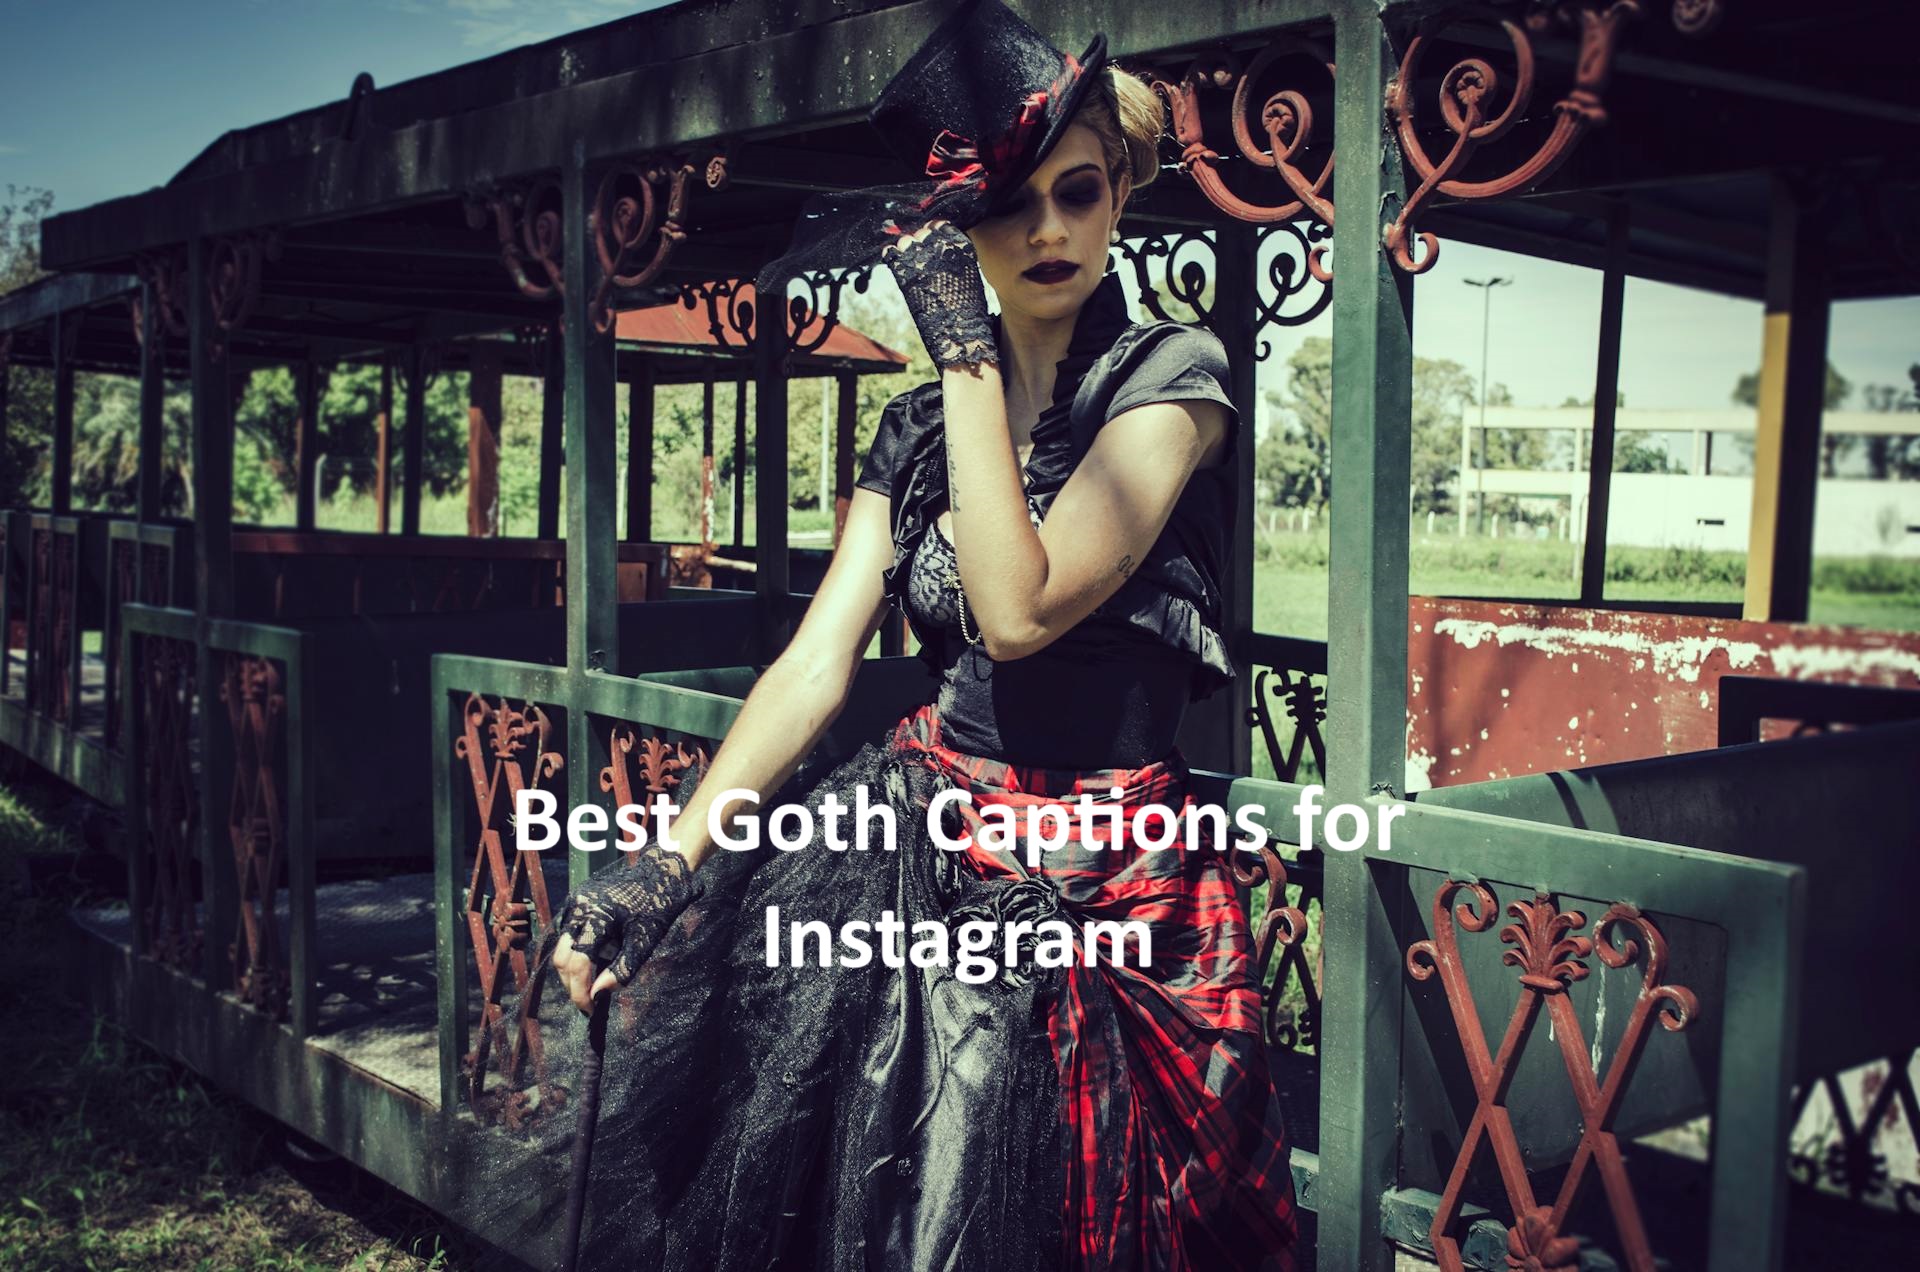 Goth Captions for Instagram